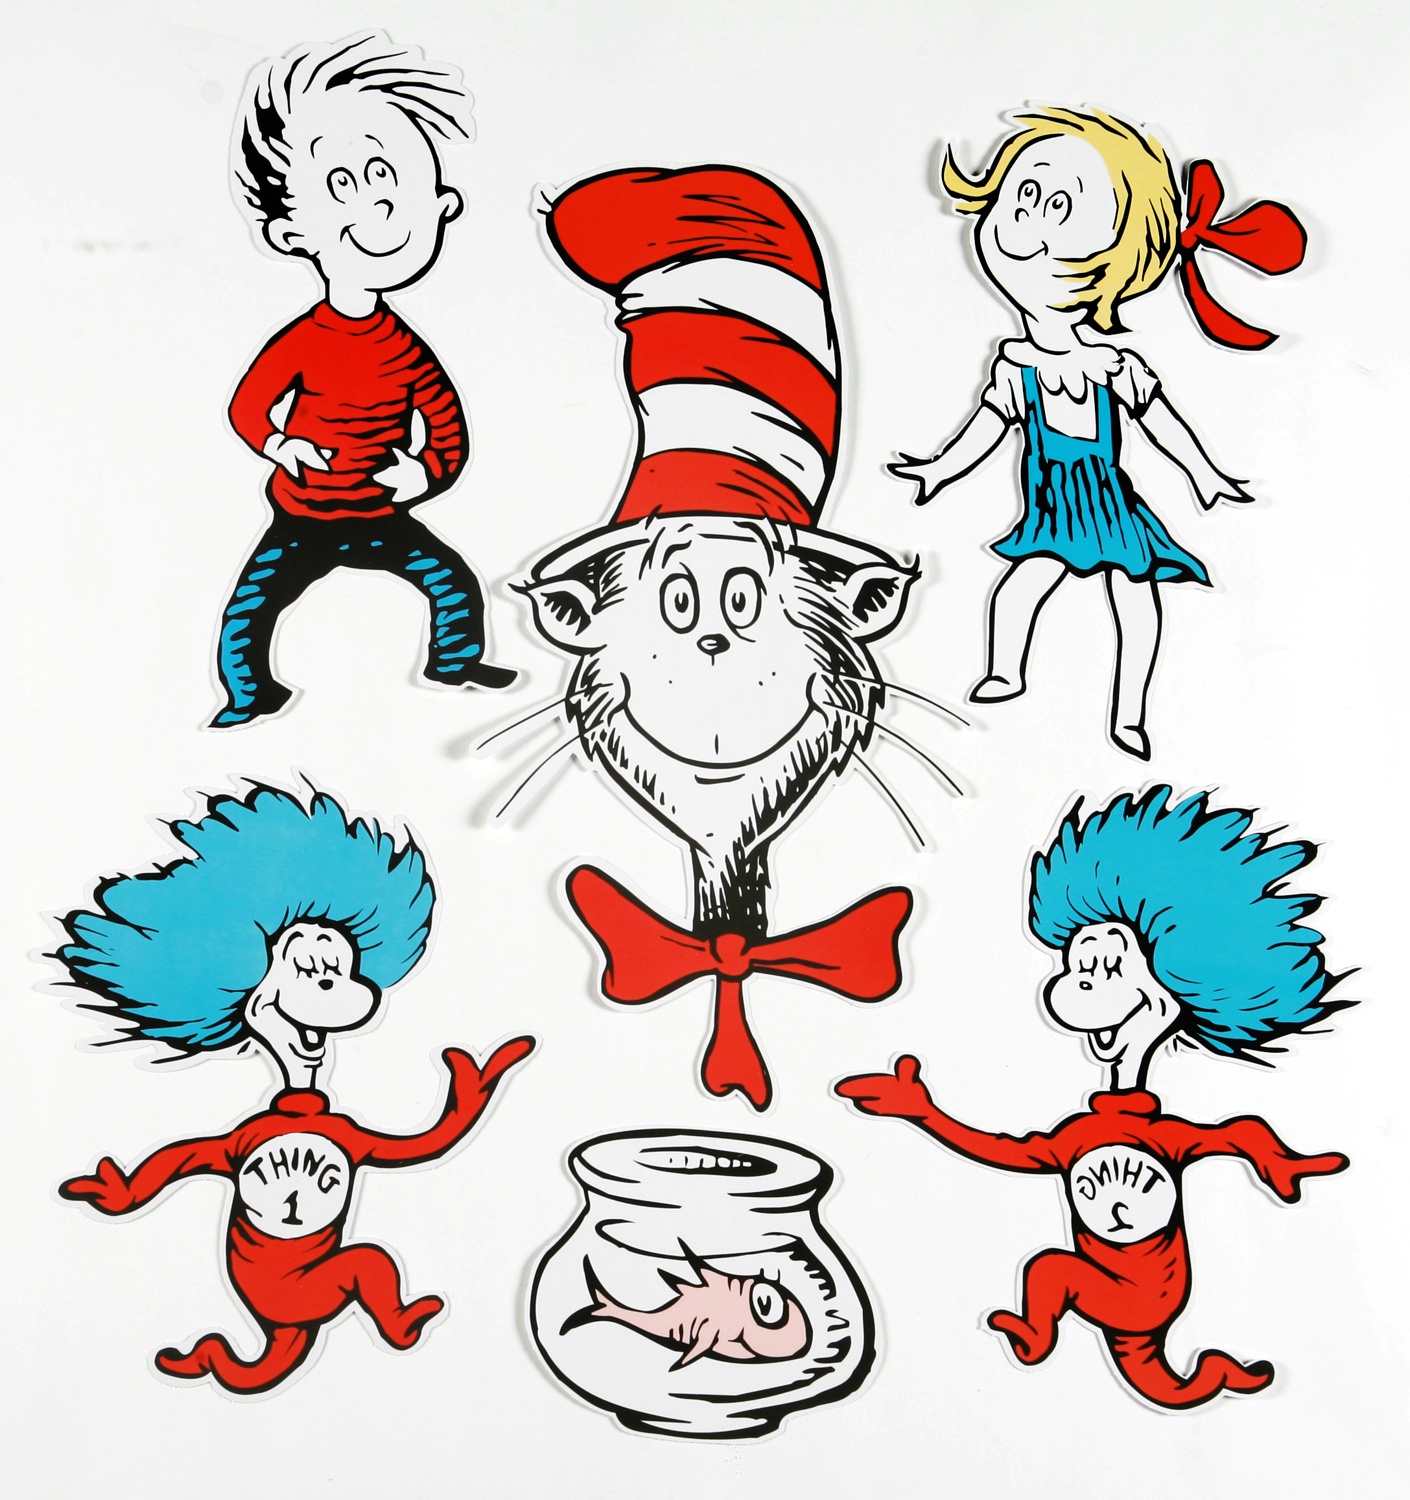 Pictures Of Dr Seuss Characters | Free Download Best Pictures Of Dr - Free Printable Pictures Of Dr Seuss Characters